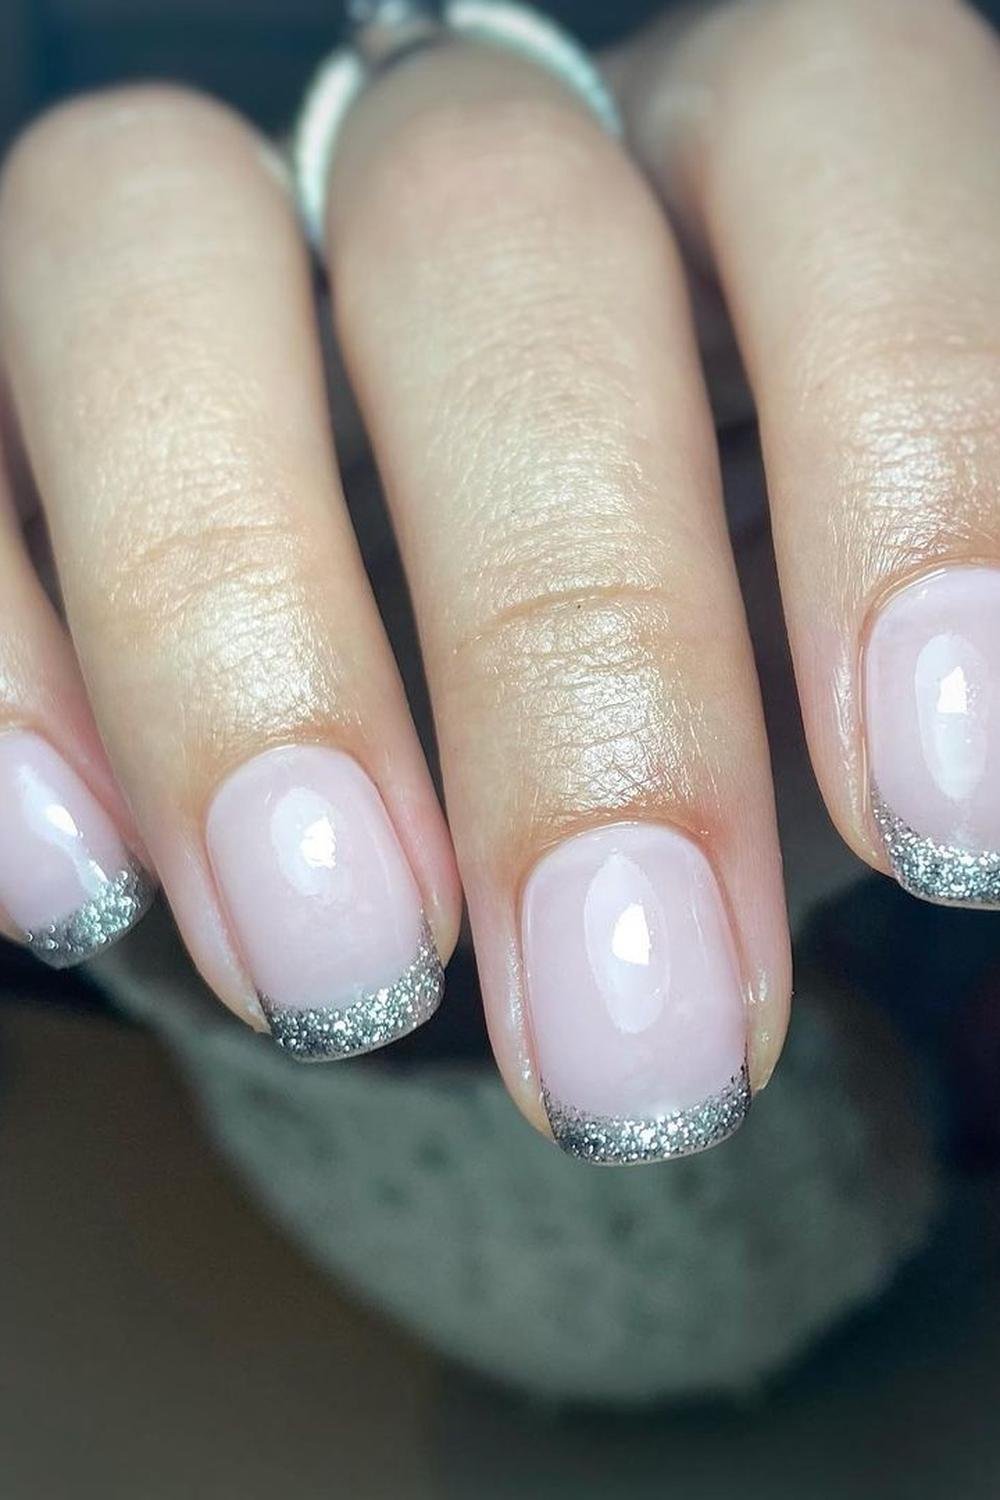 22 - Picture of Glitter French Tip Nails